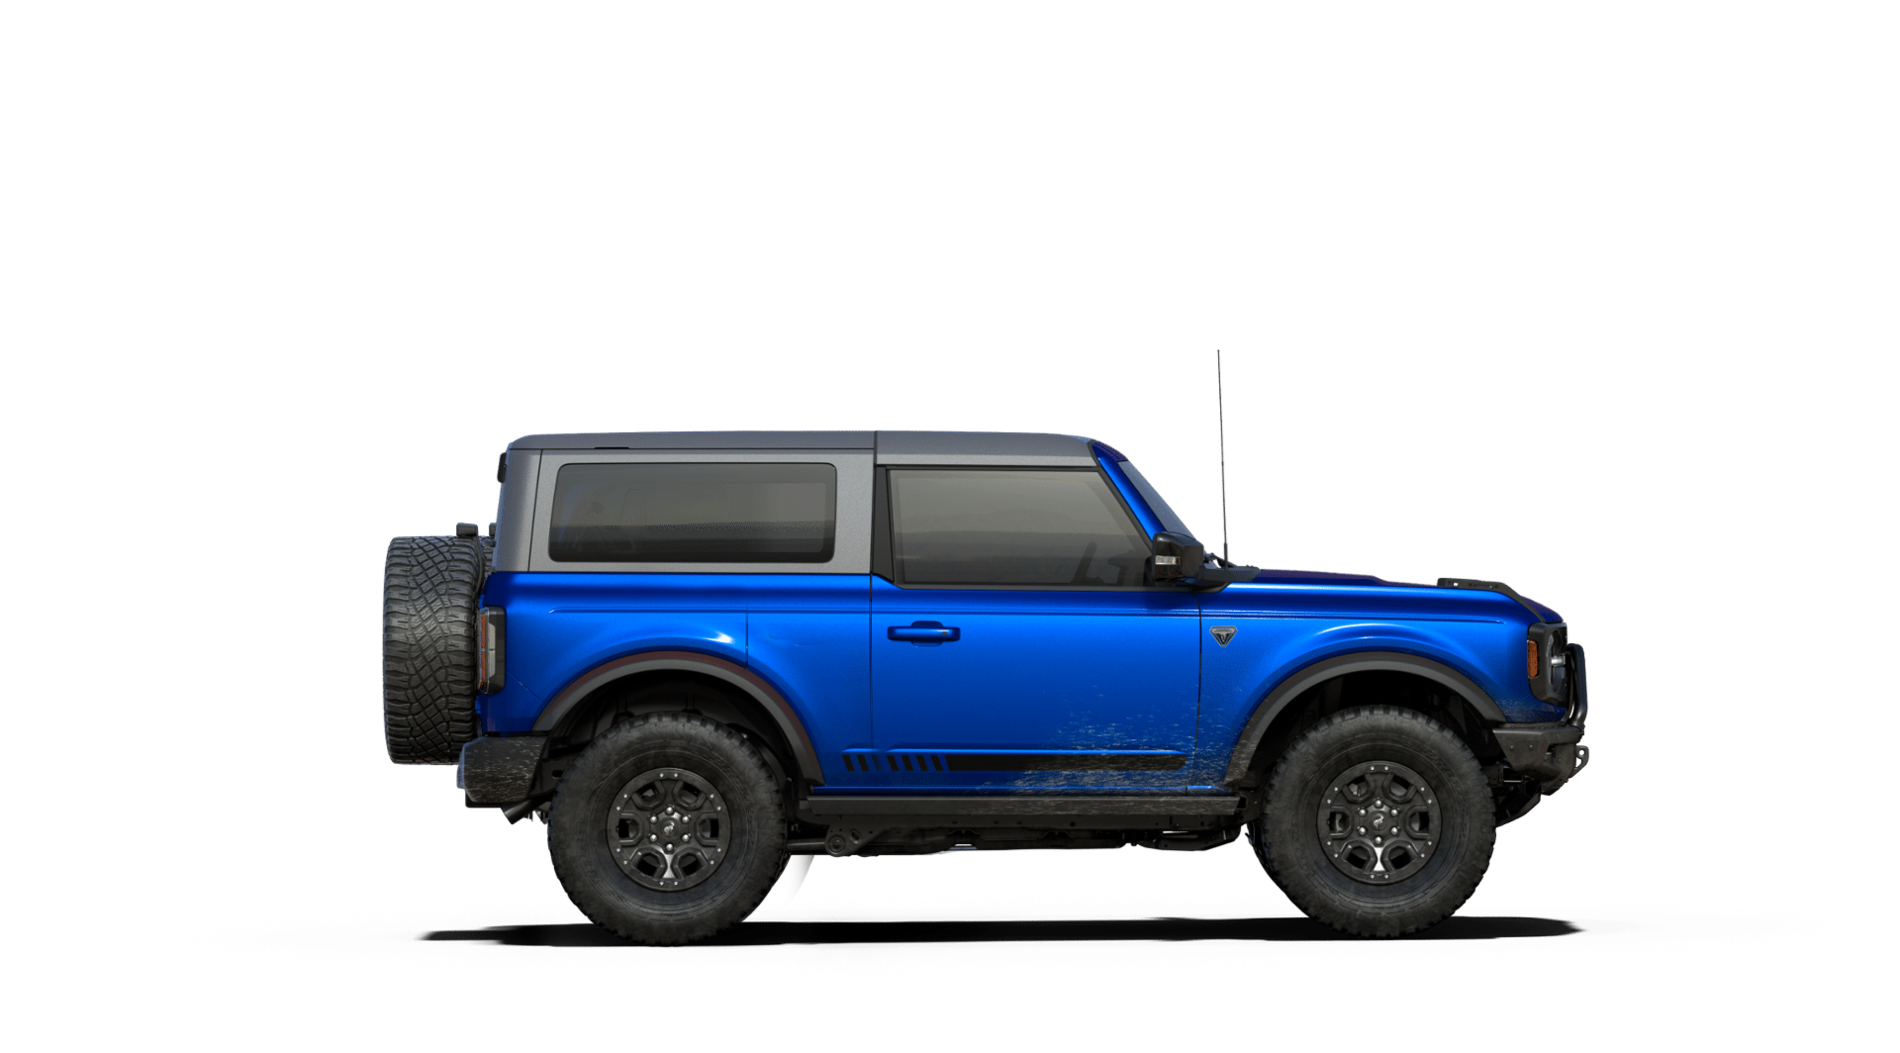 Ford Bronco Bronco Longboard Concept – 2DR LWB Imagined vehicle (1) (2)